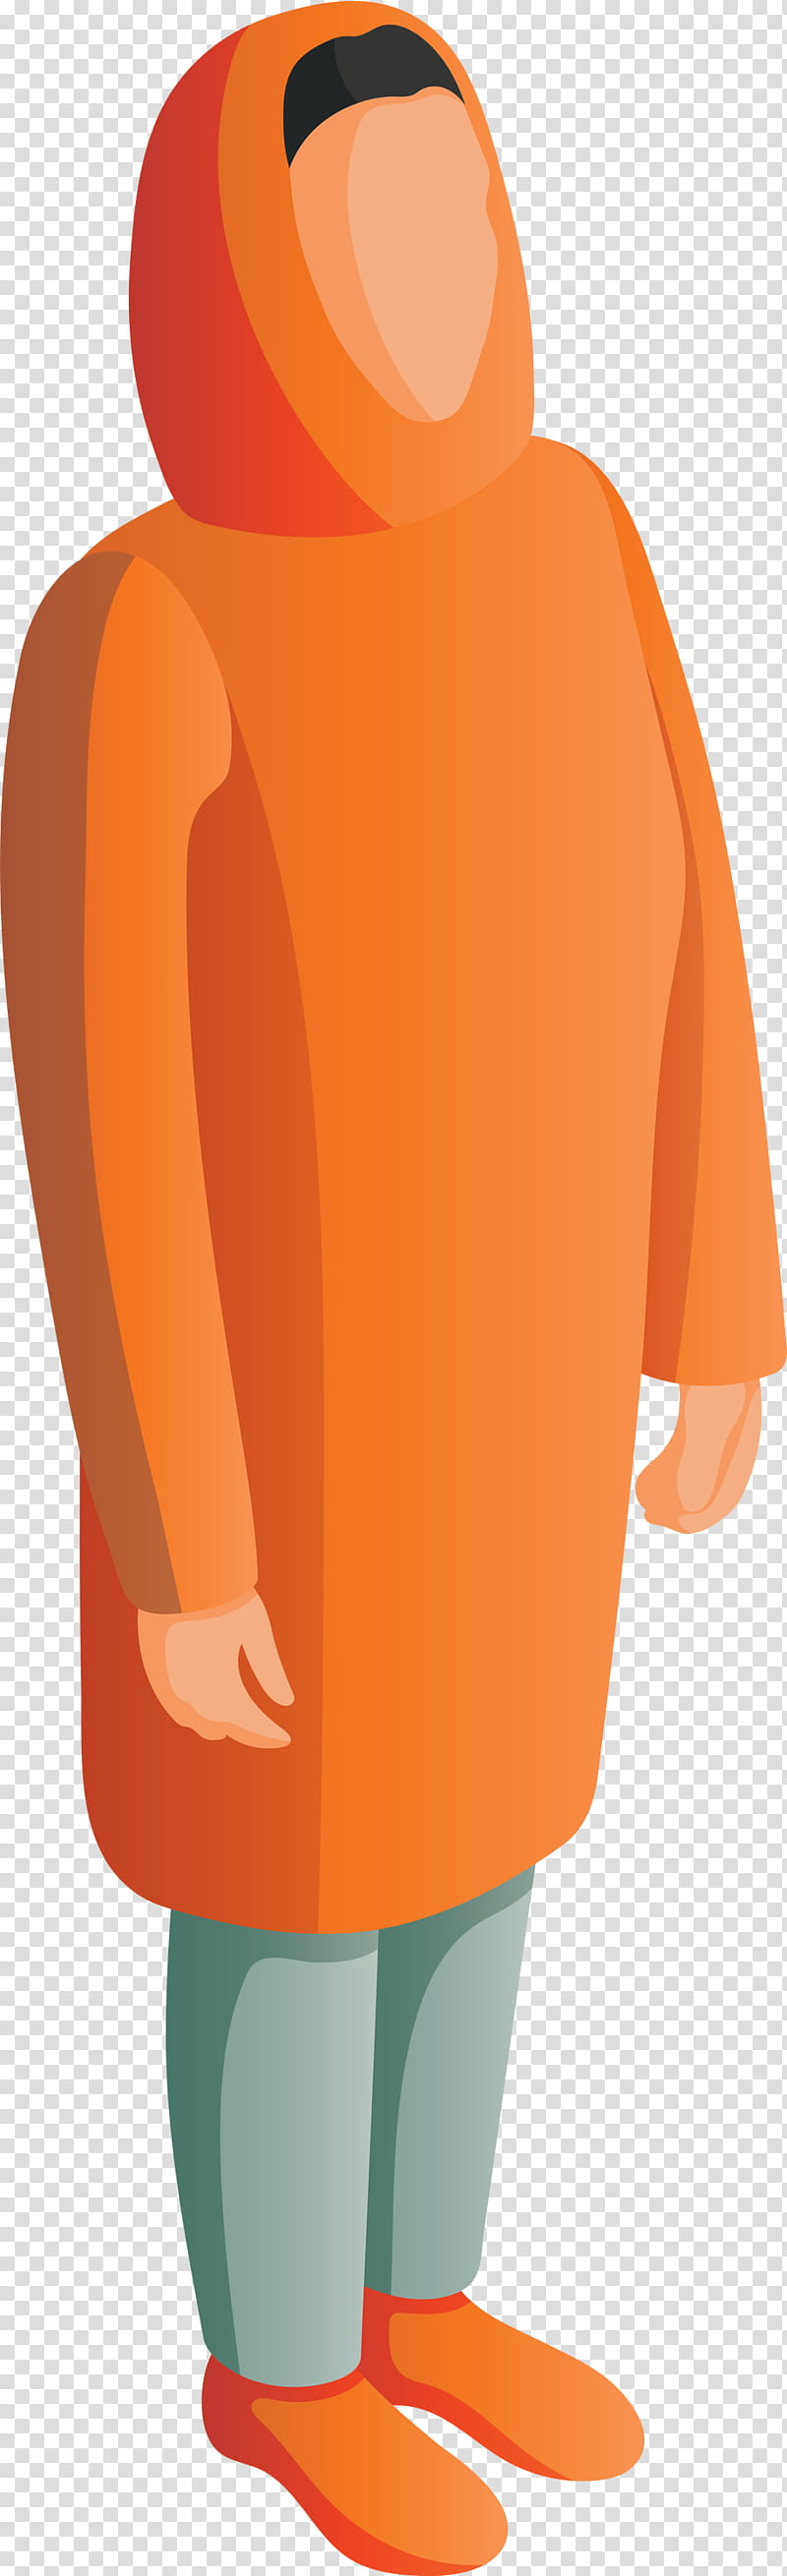 Arabic Family Arab people Arabs, Orange, Clothing, Yellow, Peach, Tshirt, Top, Sleeve transparent background PNG clipart